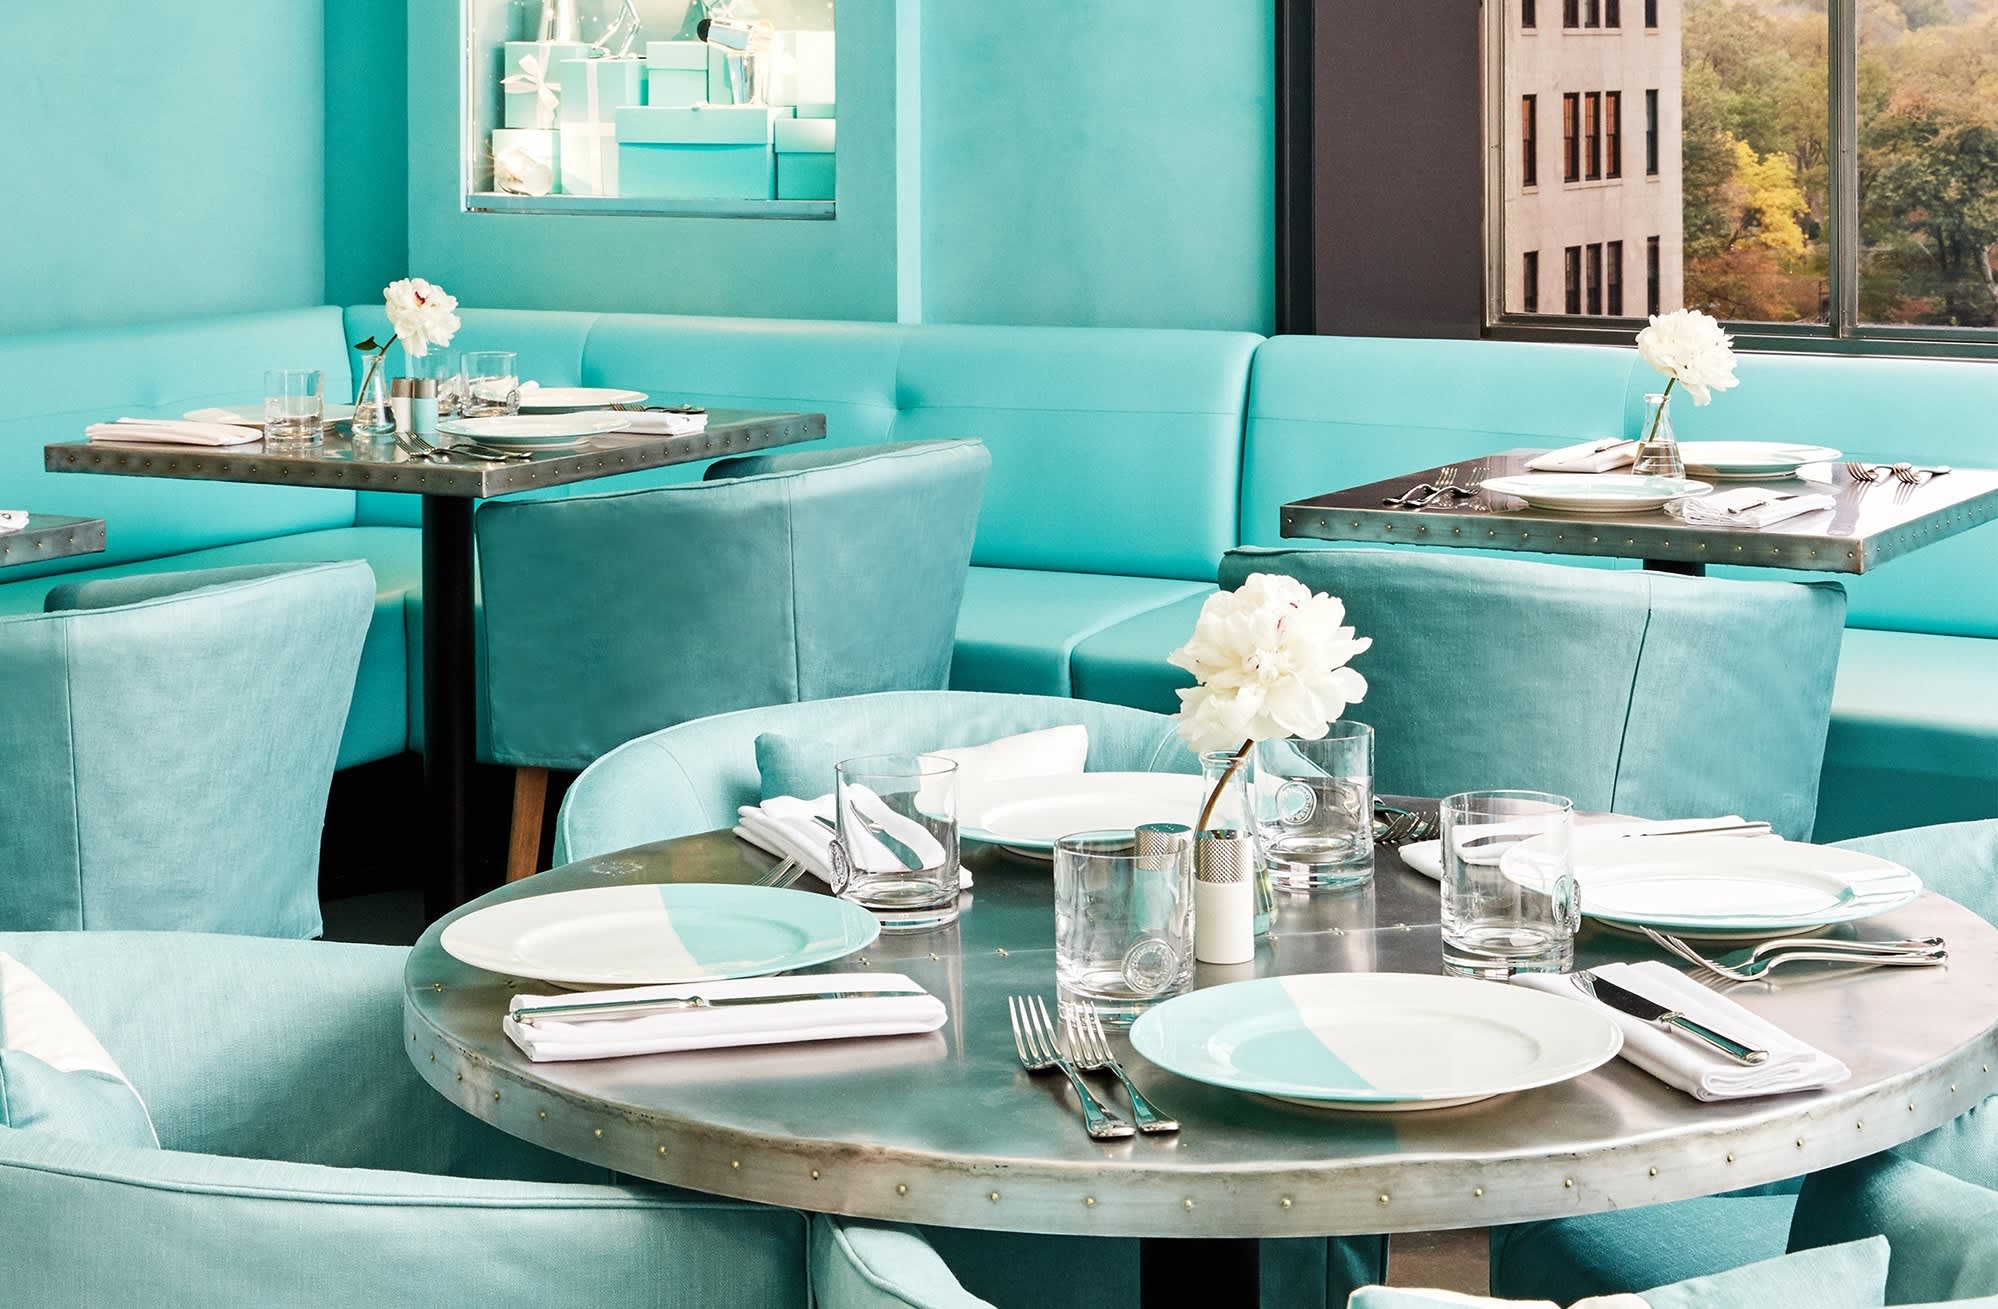 What's it's like to have breakfast at Tiffany's Blue Box Cafe